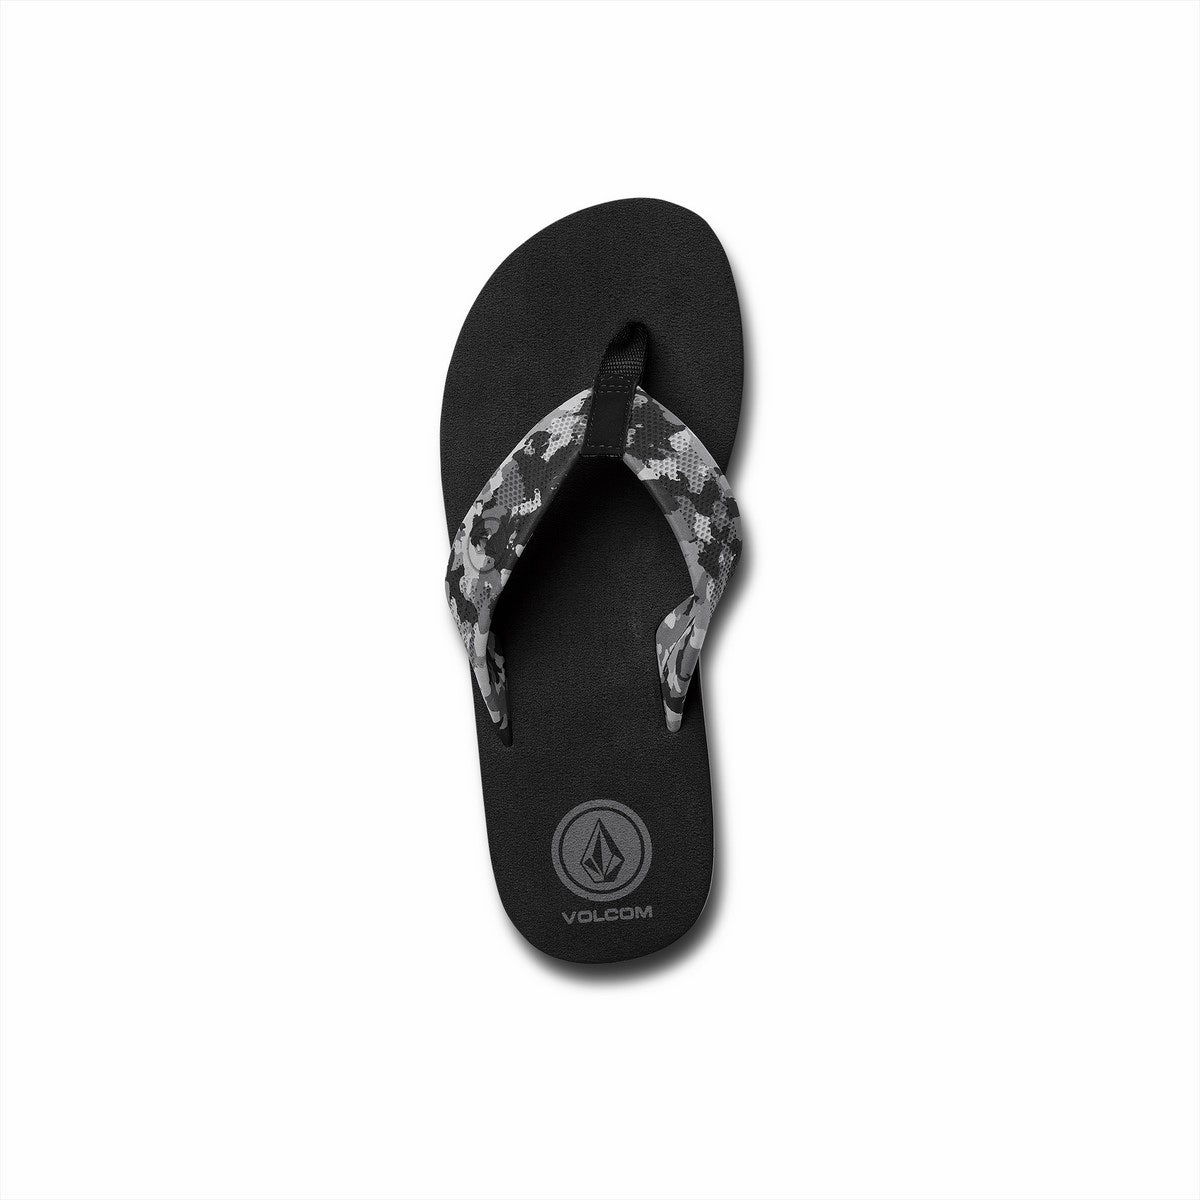 DAYCATION SANDALS - CAMOUFLAGE